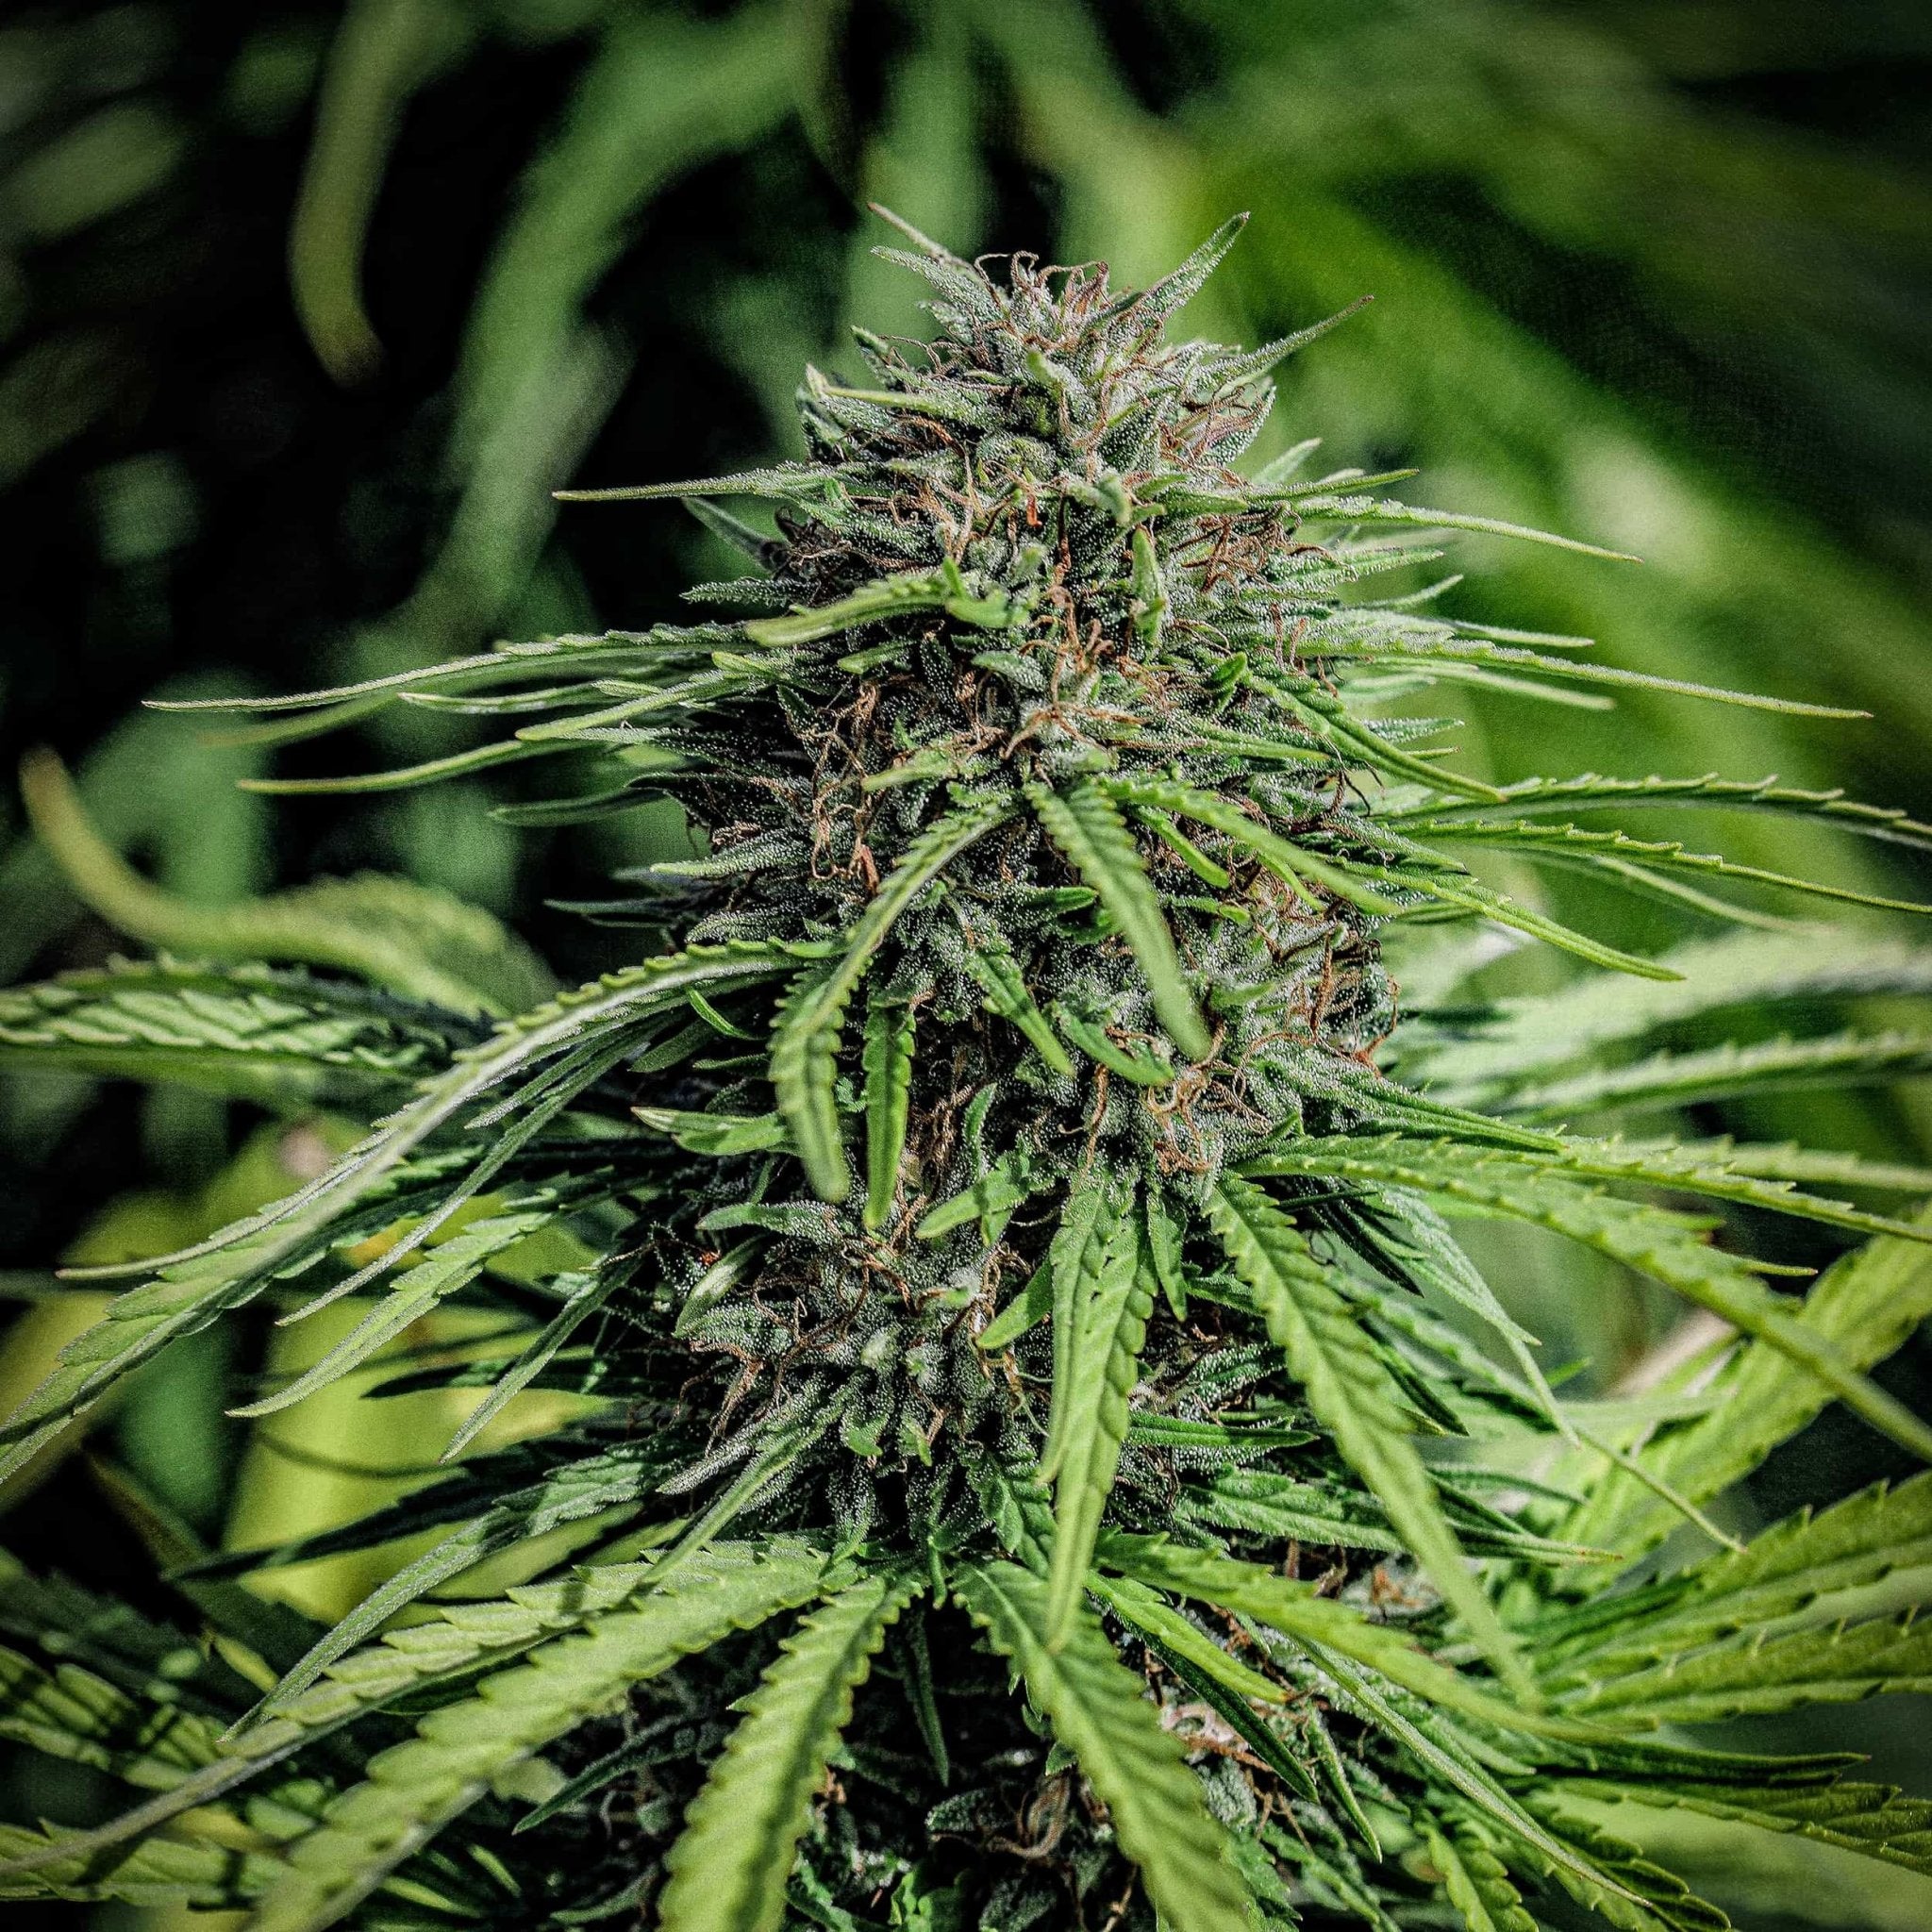 A shimmering trichome loaded Forbidden V Seedless flower shines bright in an Oregon cannabis field. The high CBDV low thc hemp variety features narrow leaves and brown hairs.